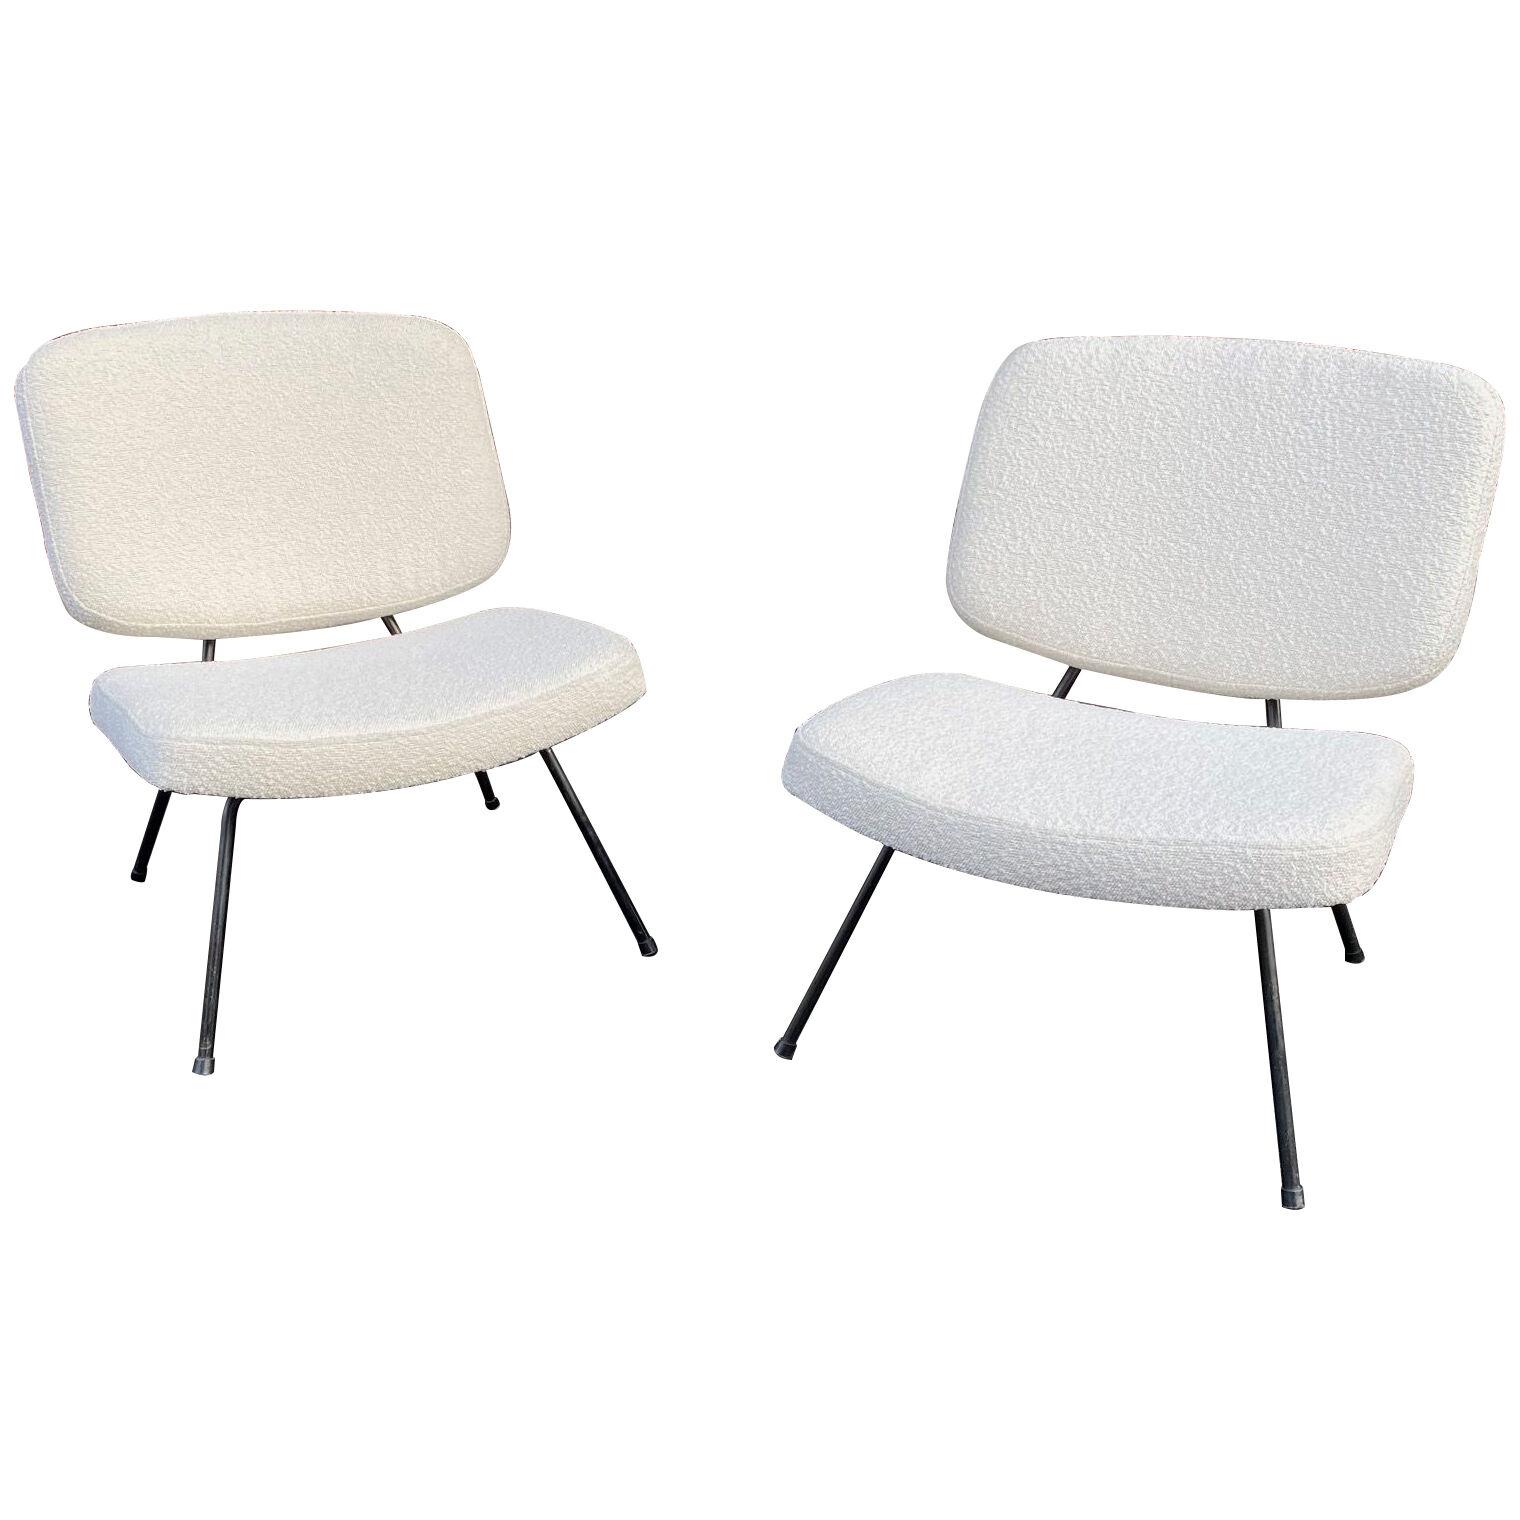 Pair of CM190 slipper chairs by Pierre Paulin for Thonet, France, 1950s